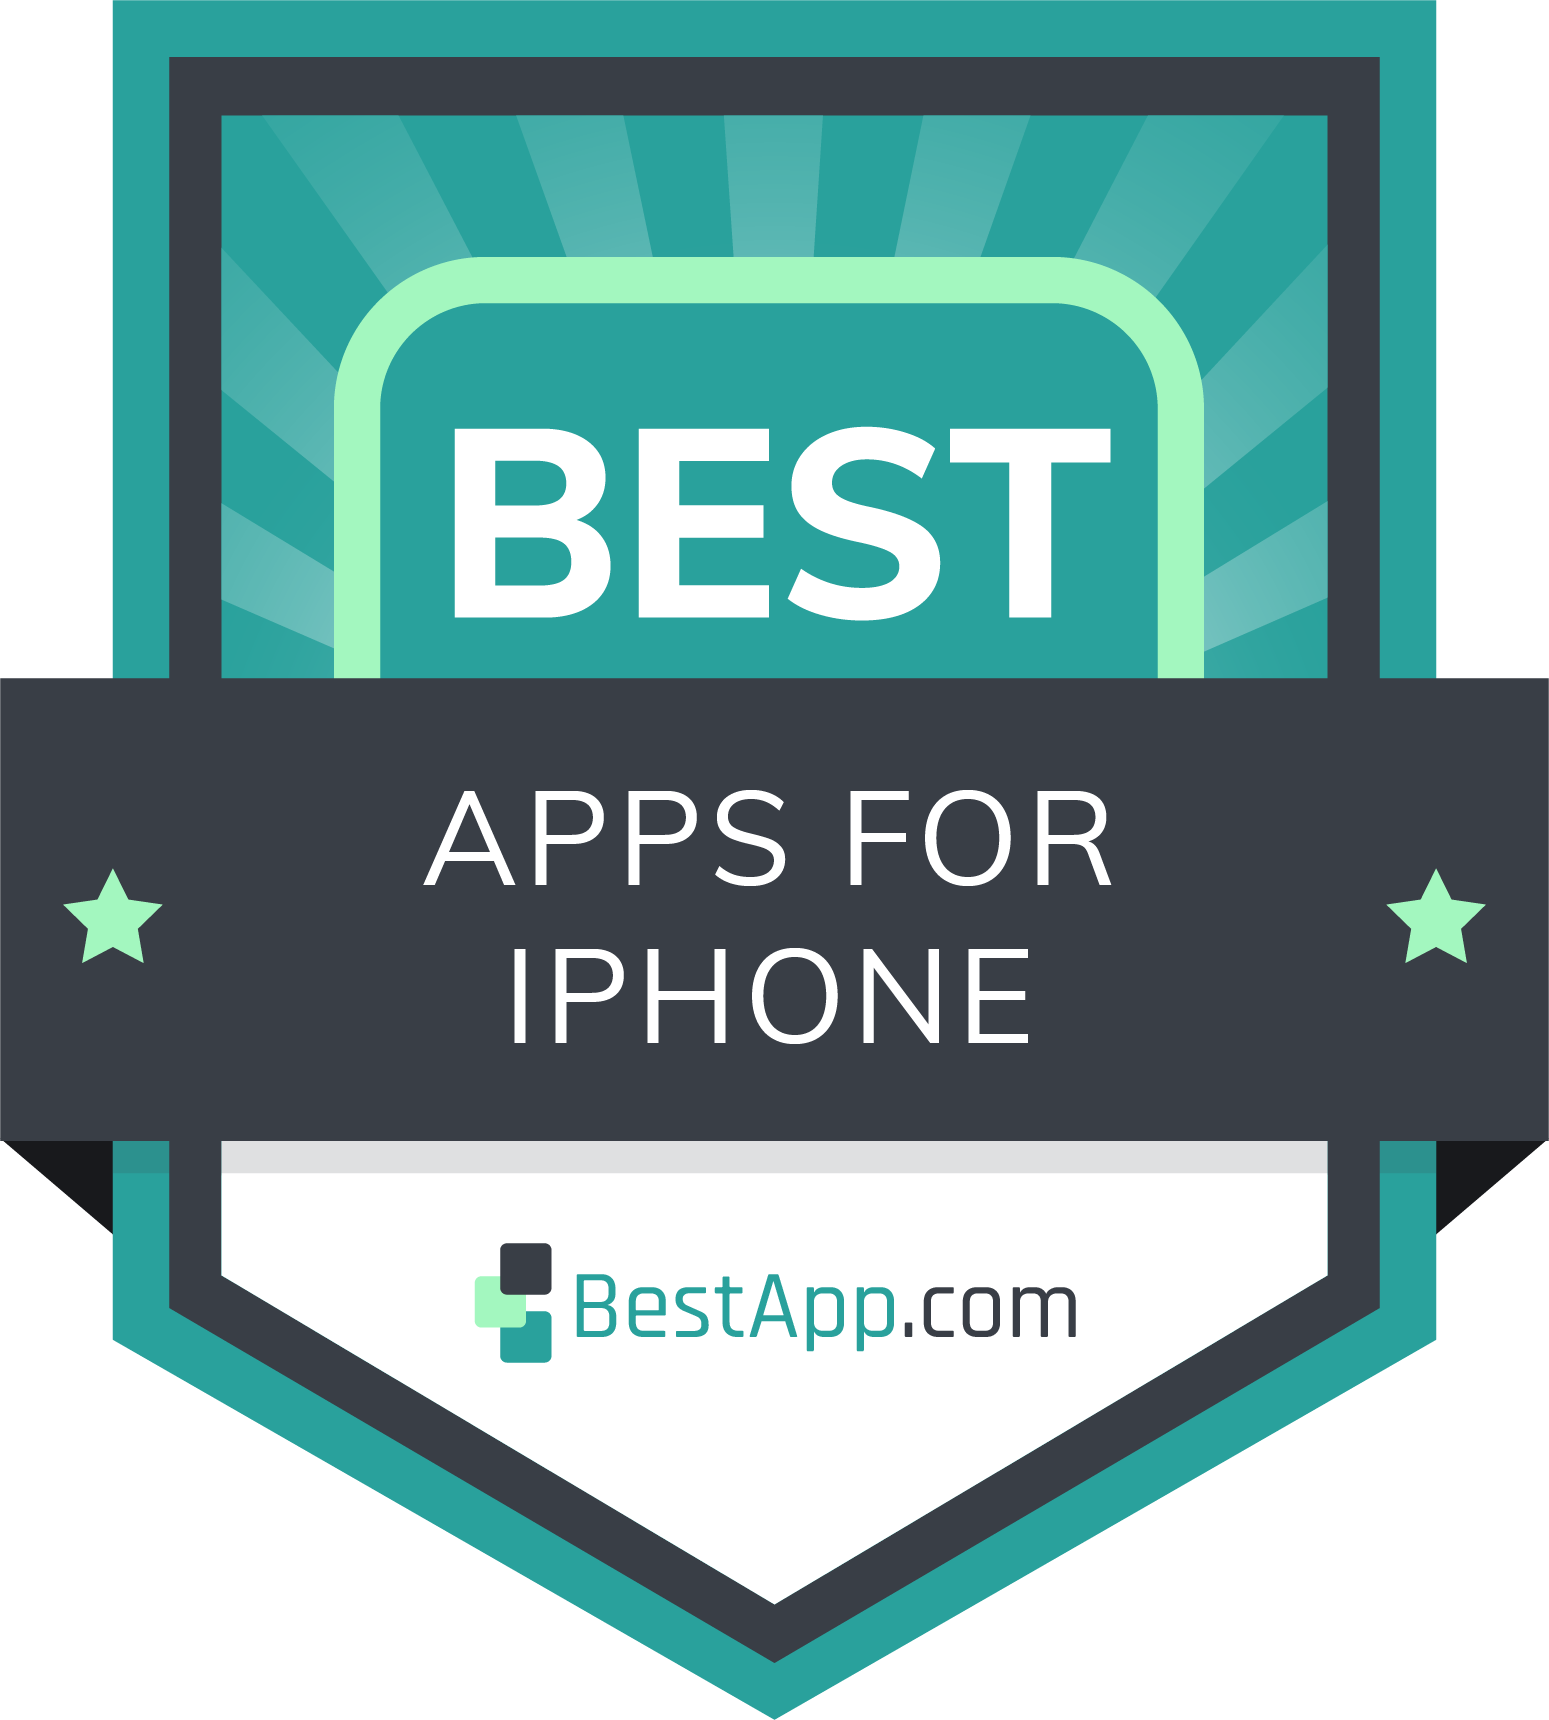 Best Apps for iPhone Badge